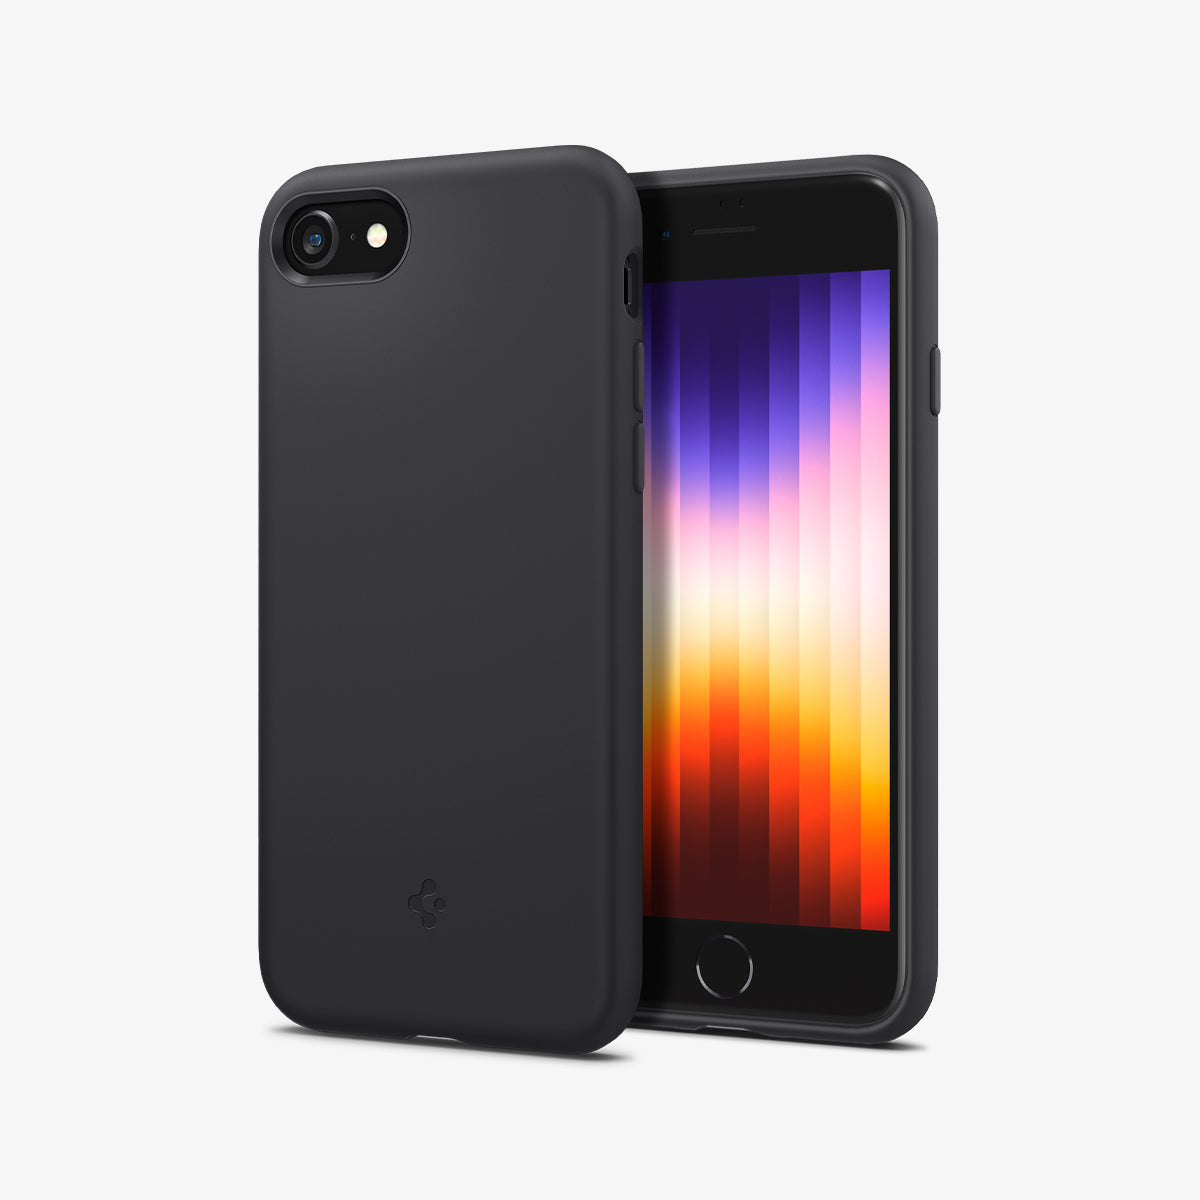 ACS04349 - iPhone SE Silicone Fit case in black showing the back and front